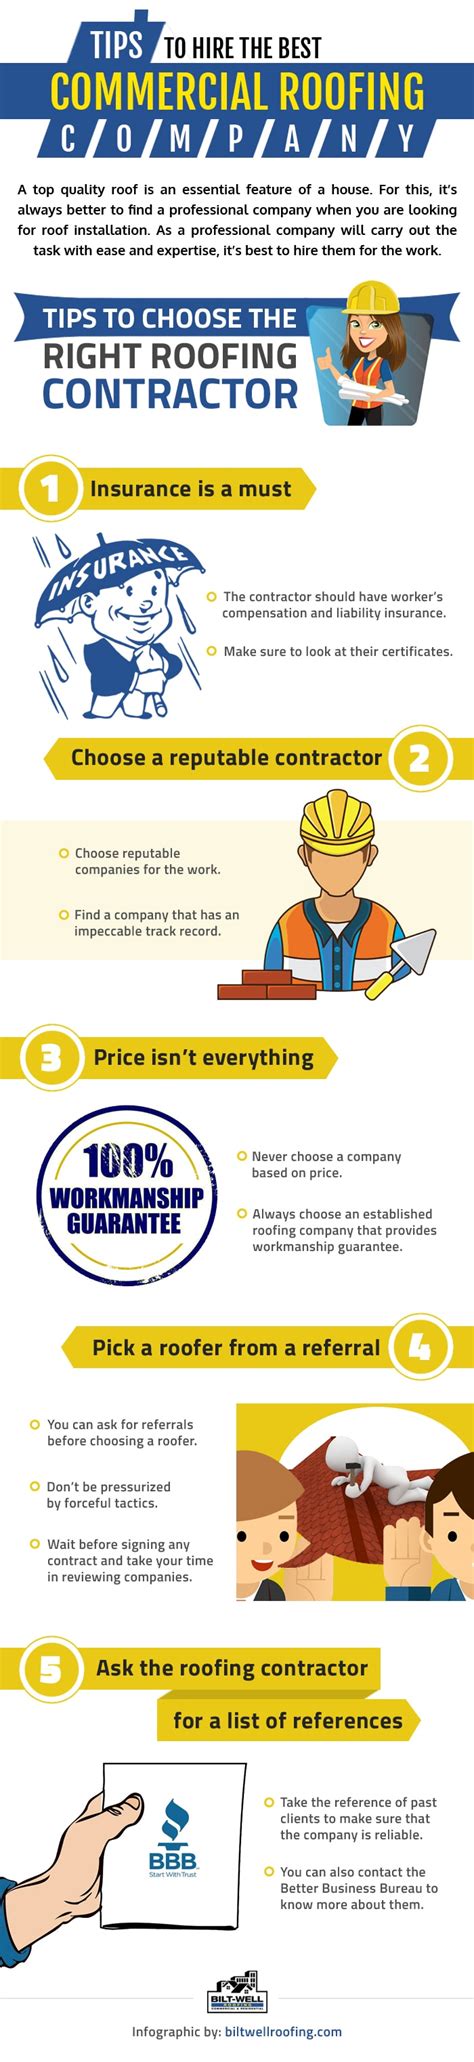 Infographic Tips To Hire The Best Commercial Roofing Company Bilt